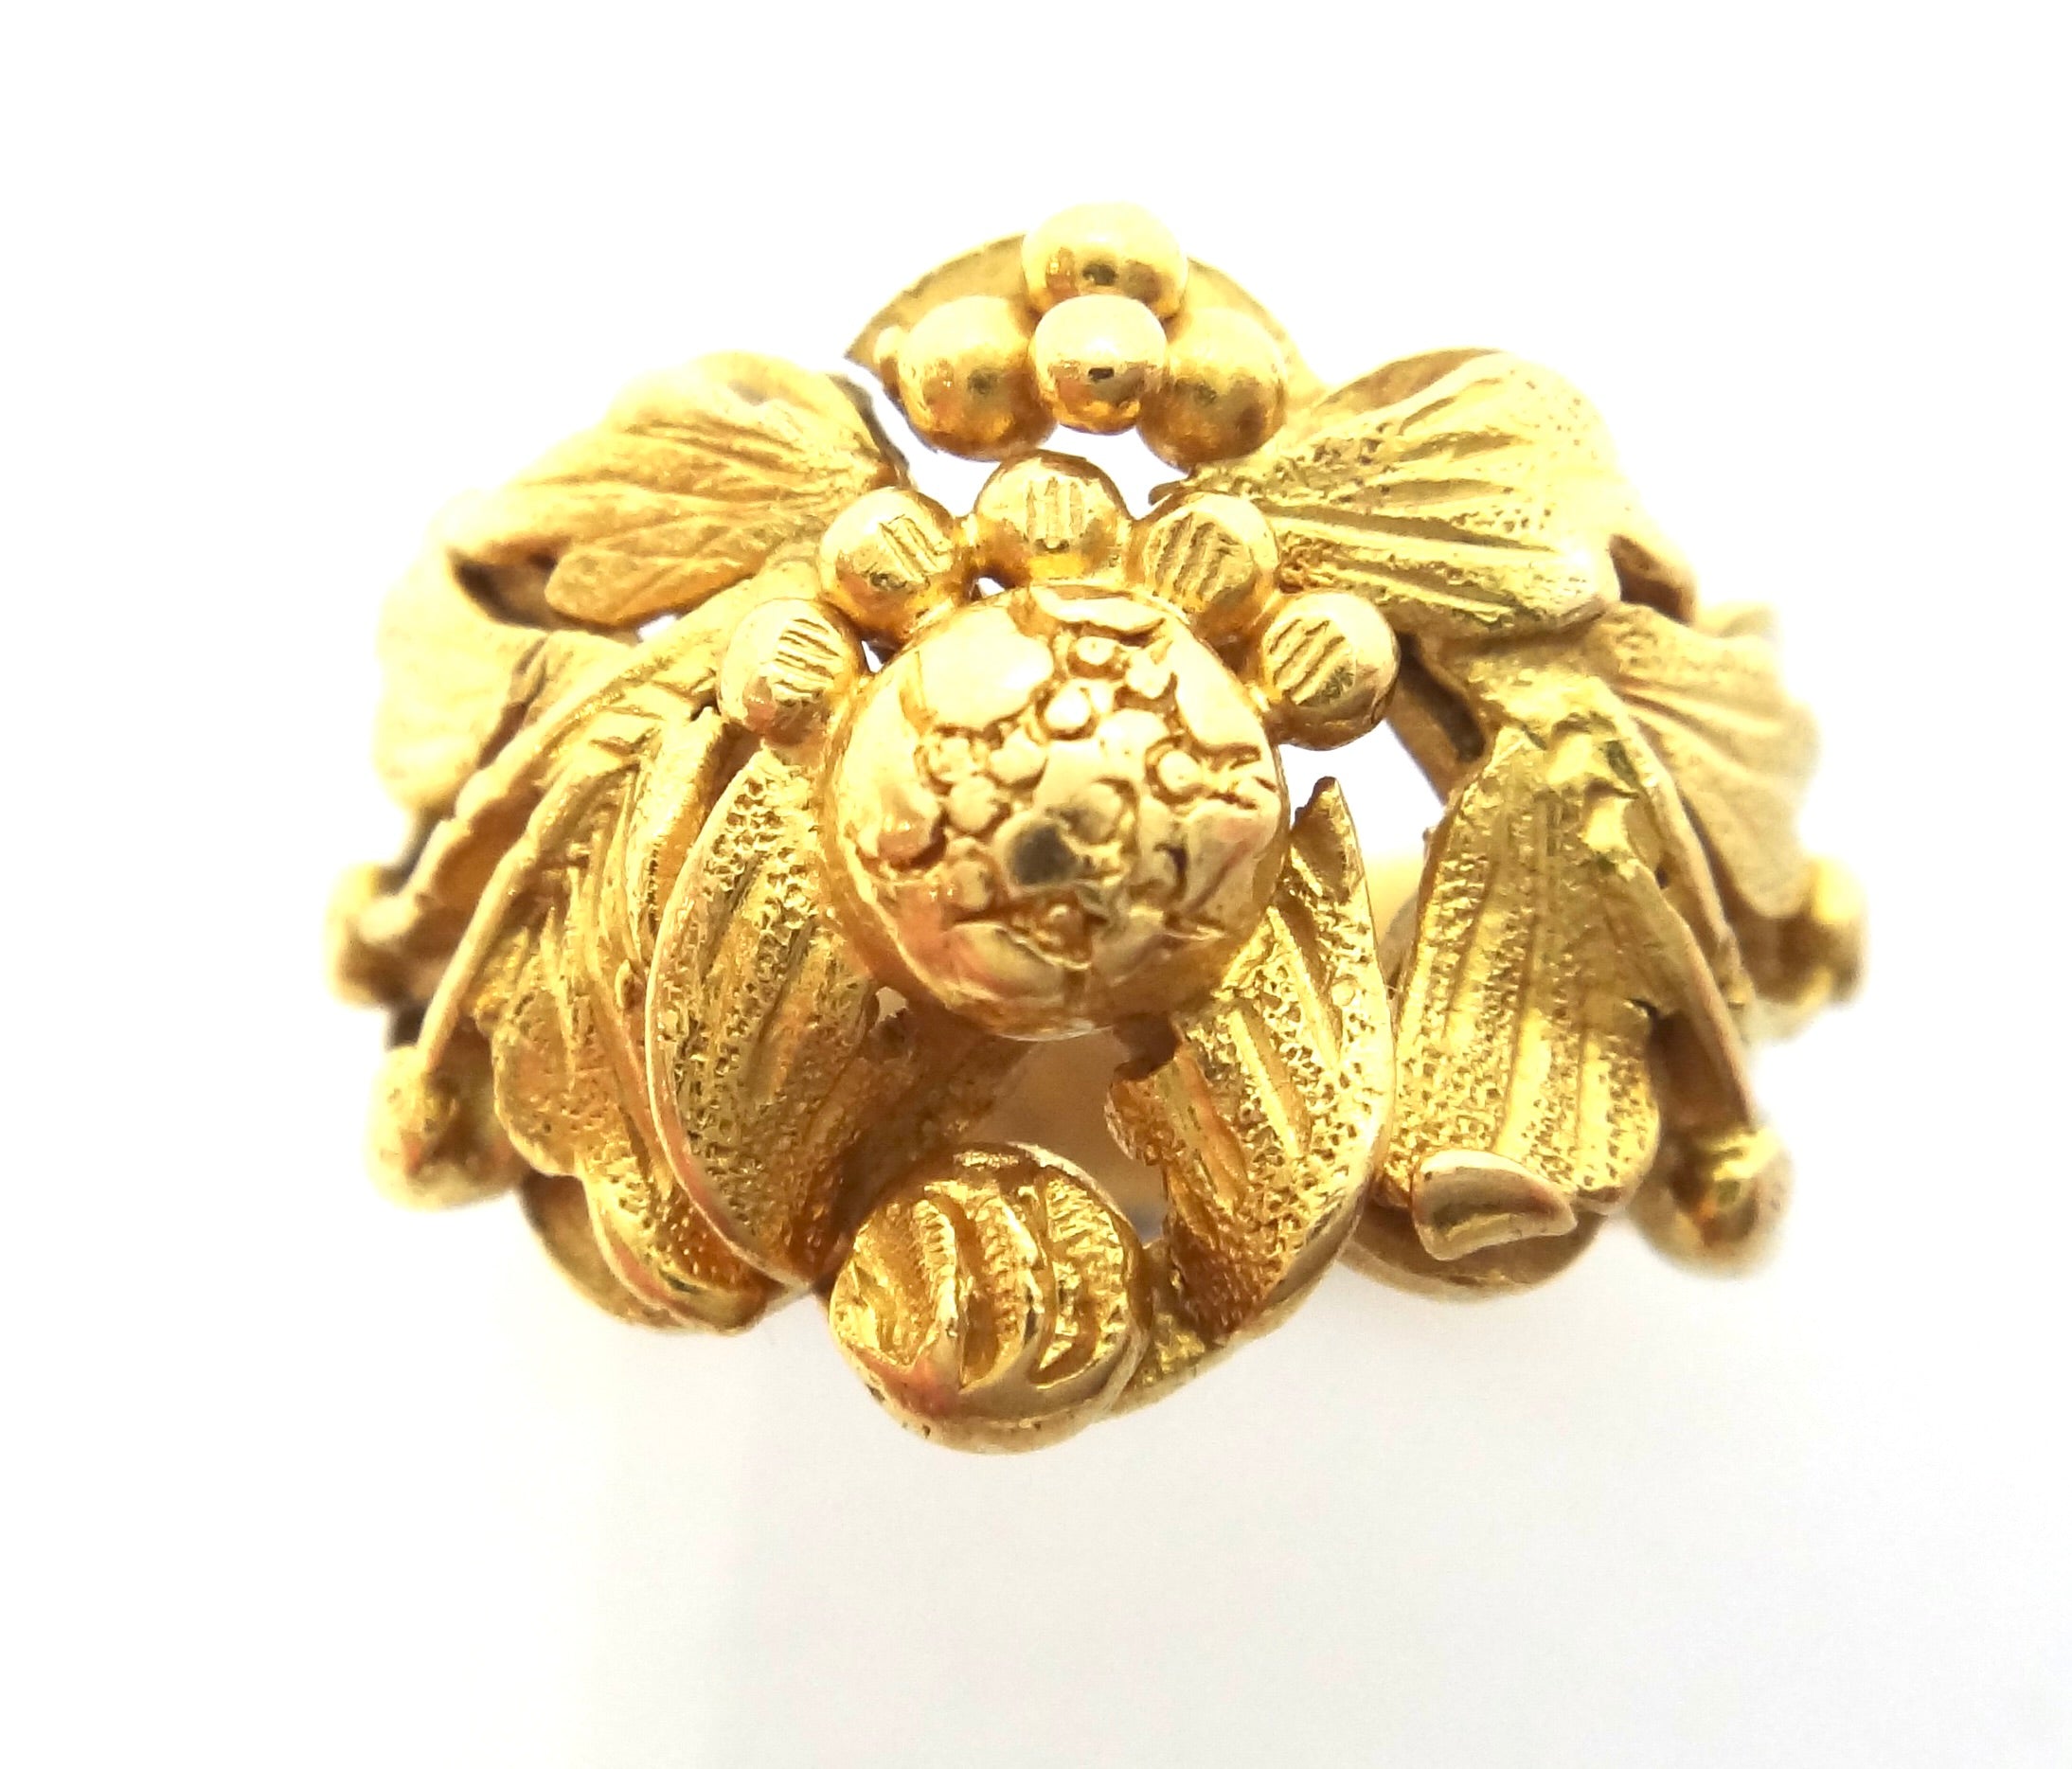 ANTIQUE 18ct Yellow GOLD Floral Design Ring c.1870